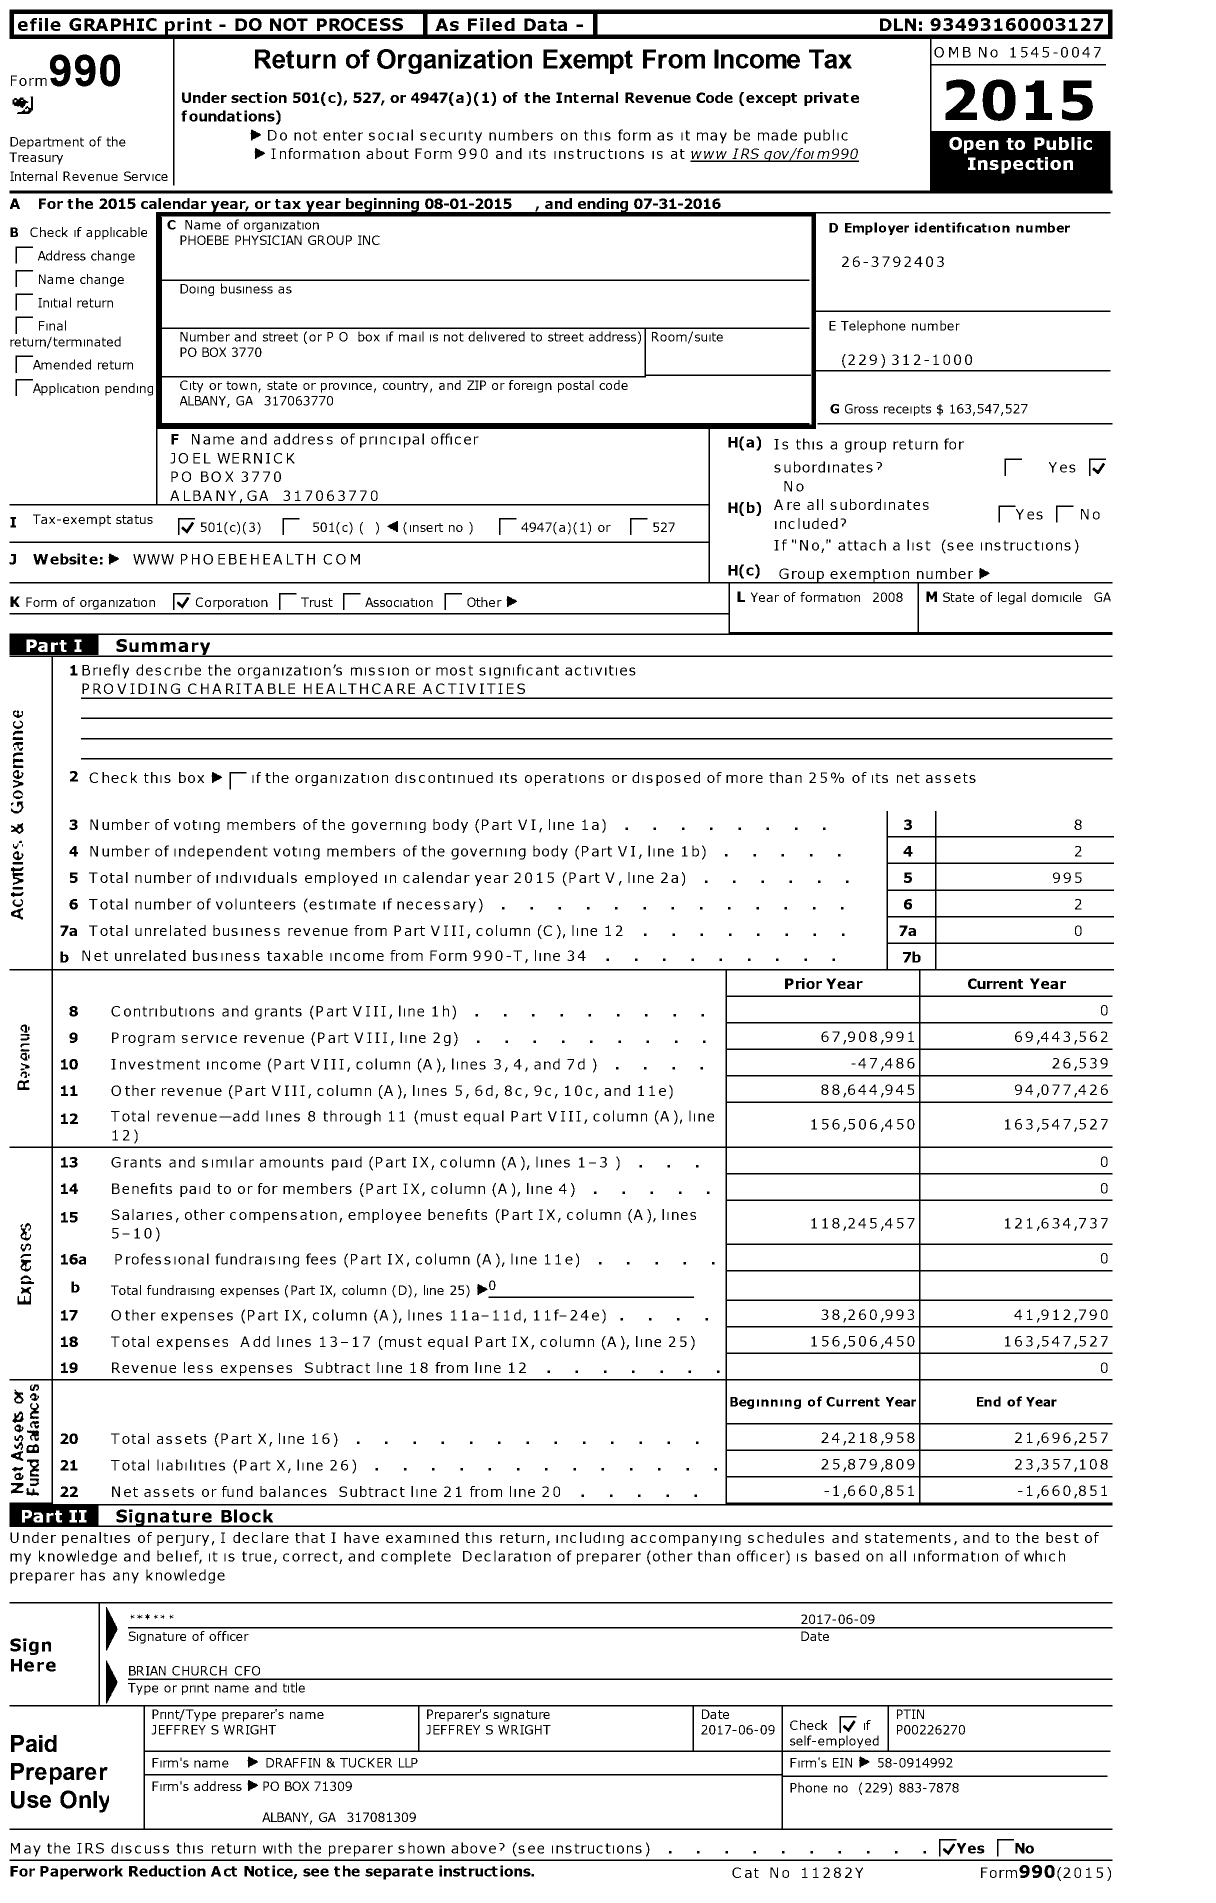 Image of first page of 2015 Form 990 for Phoebe Physician Group